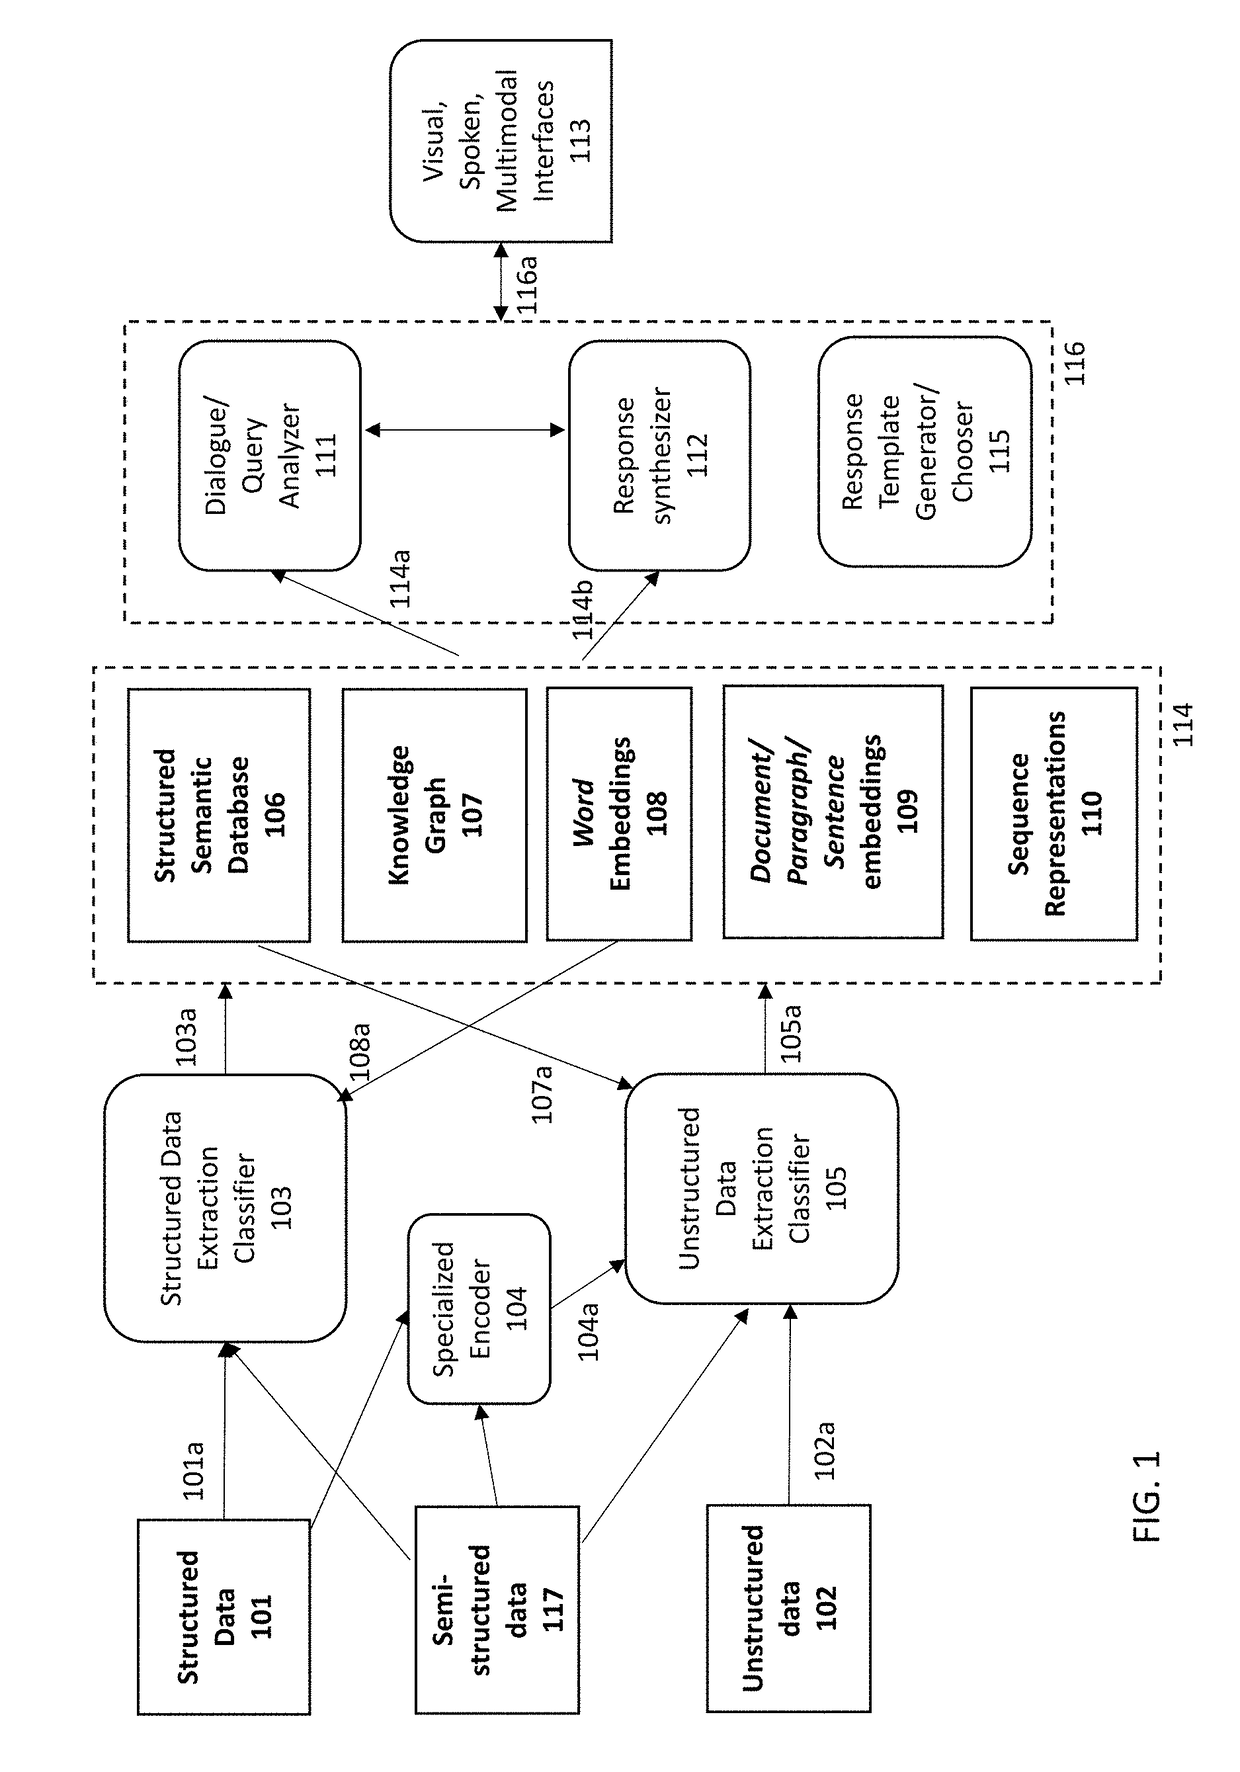 Systems, methods, and computer readable media for visualization of semantic information and inference of temporal signals indicating salient associations between life science entities